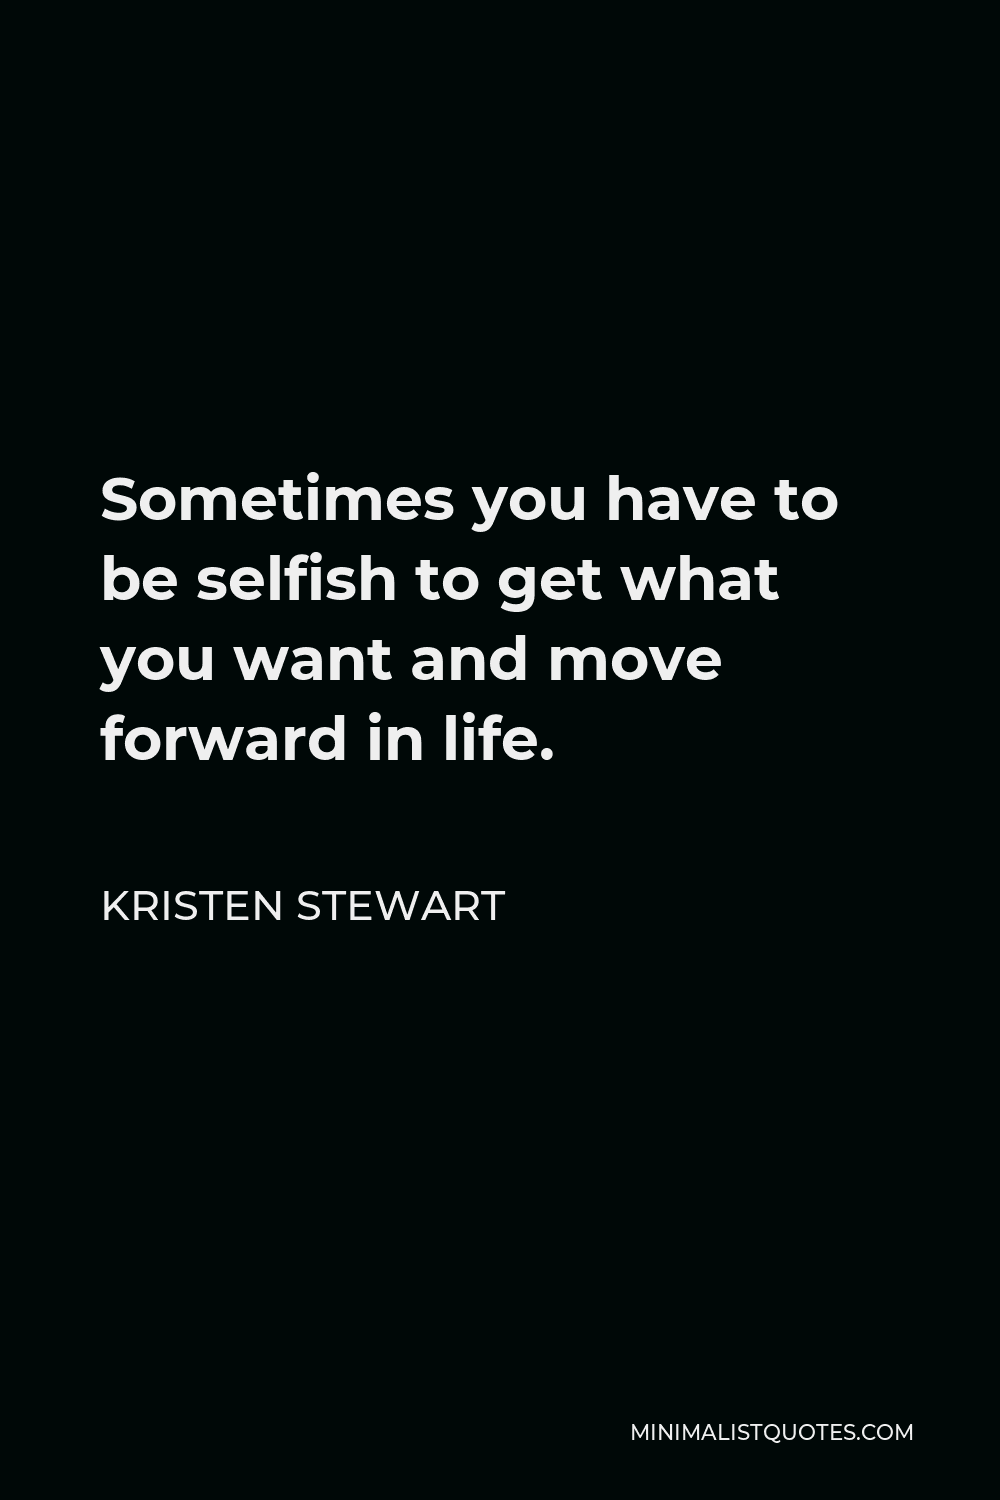 Kristen Stewart Quote: Sometimes you have to be selfish to get ...